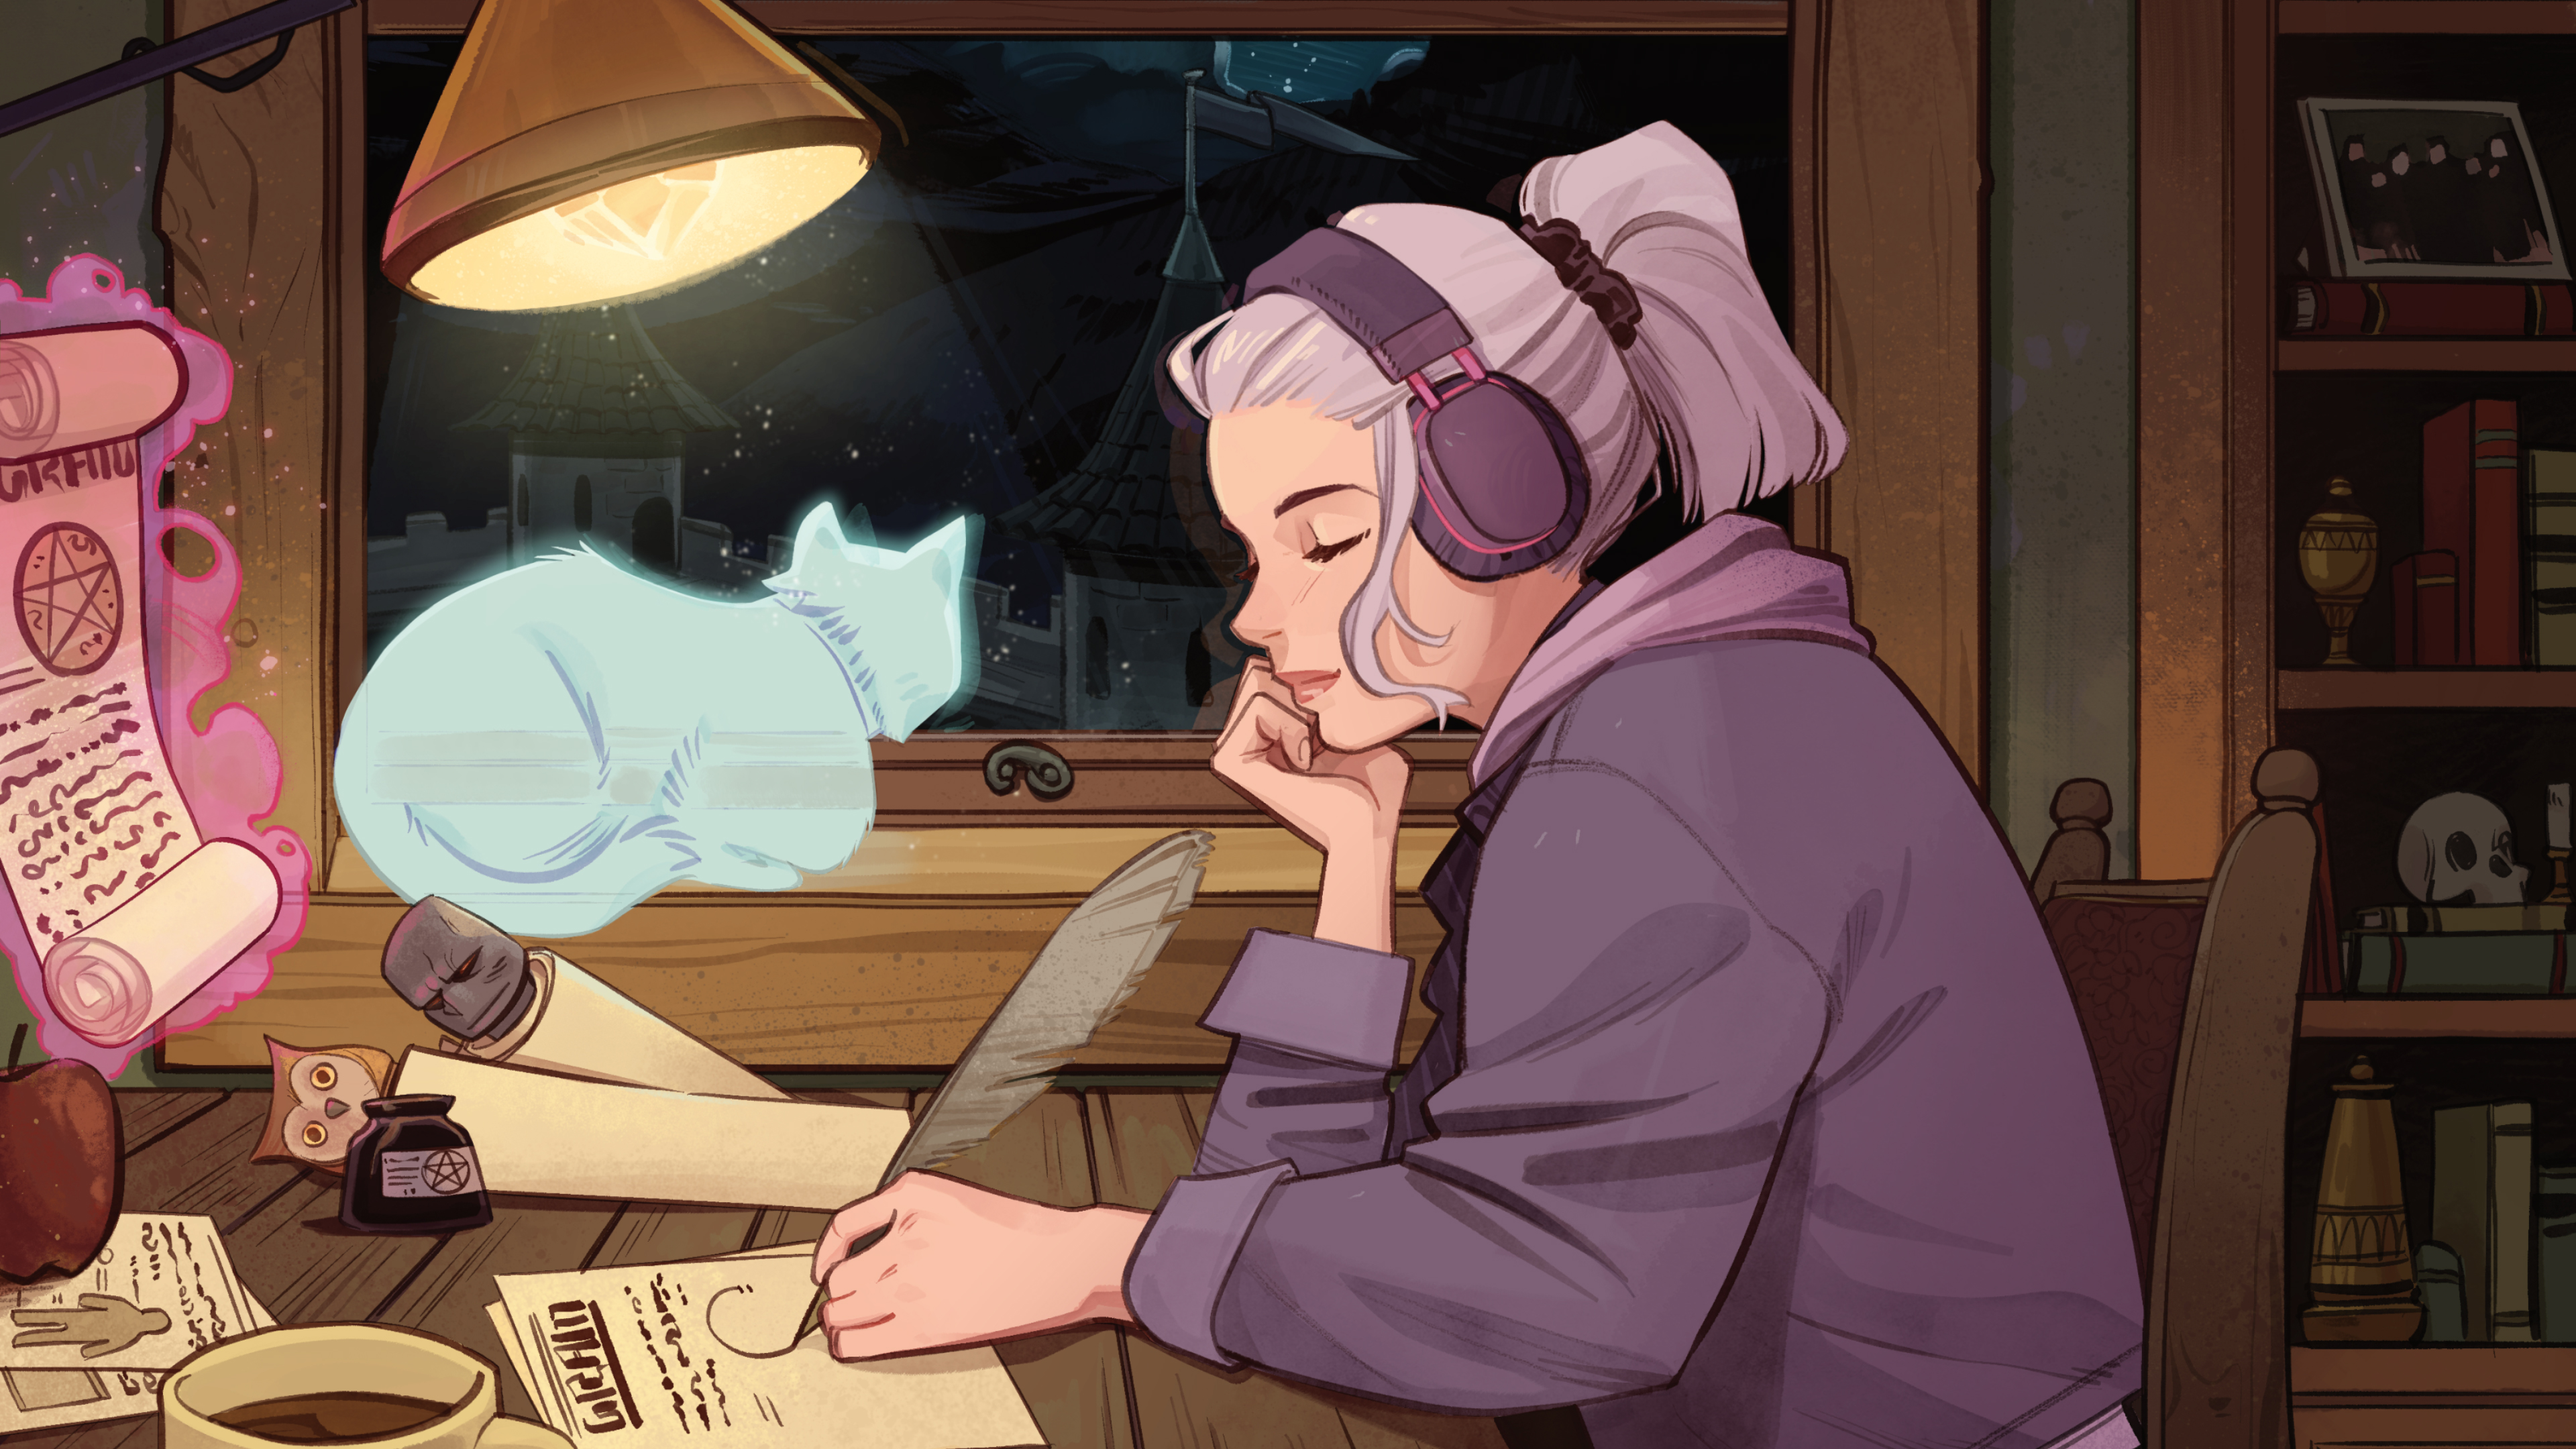 Lofi Bards (To Study and Relax To): A Magical, Musical TTRPG